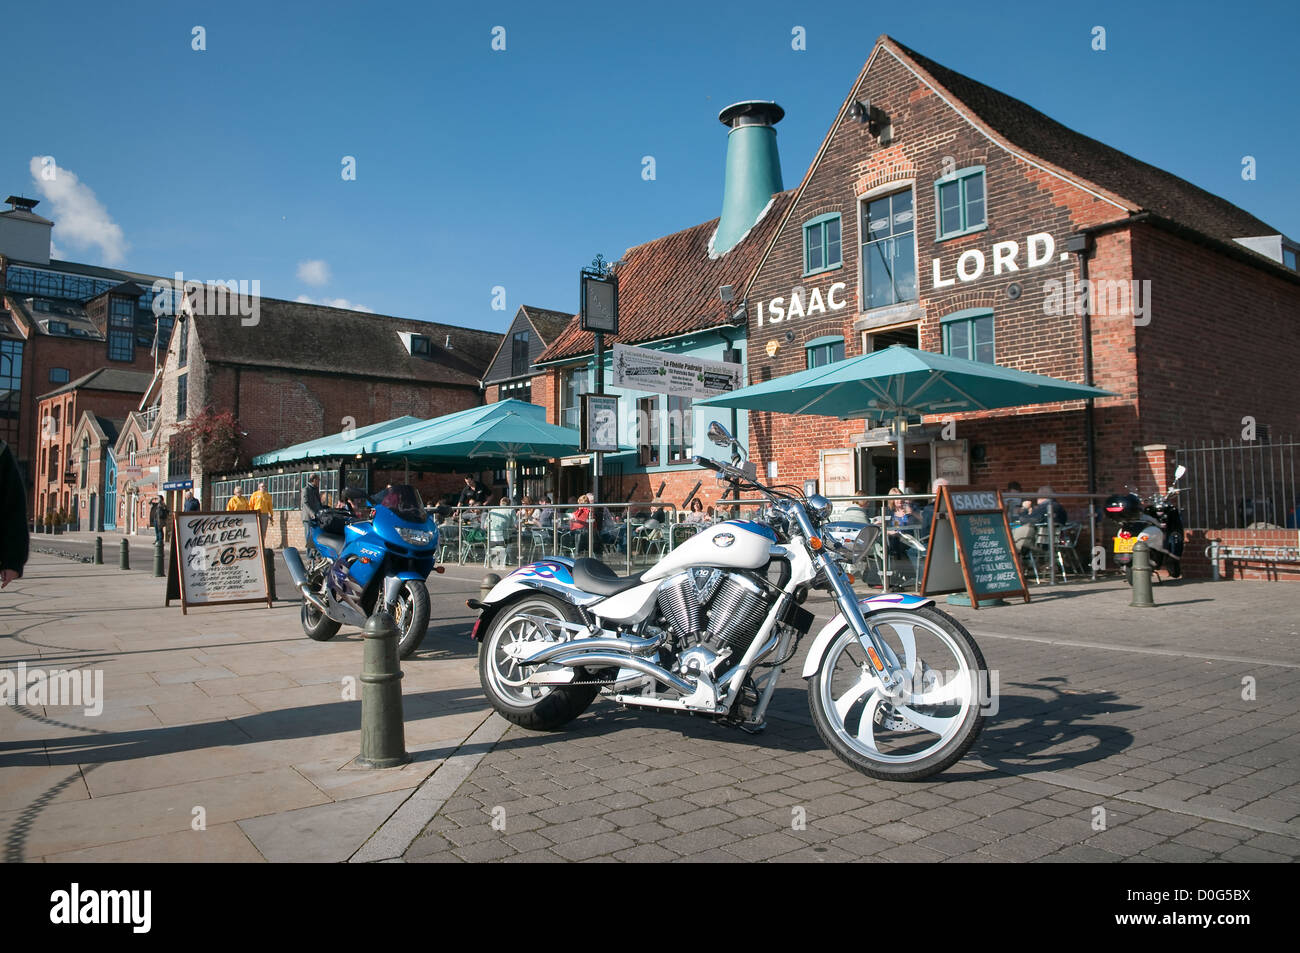 Motorcycles at the front of Isaac Lord, Ipswich, Suffolk, UK. Stock Photo